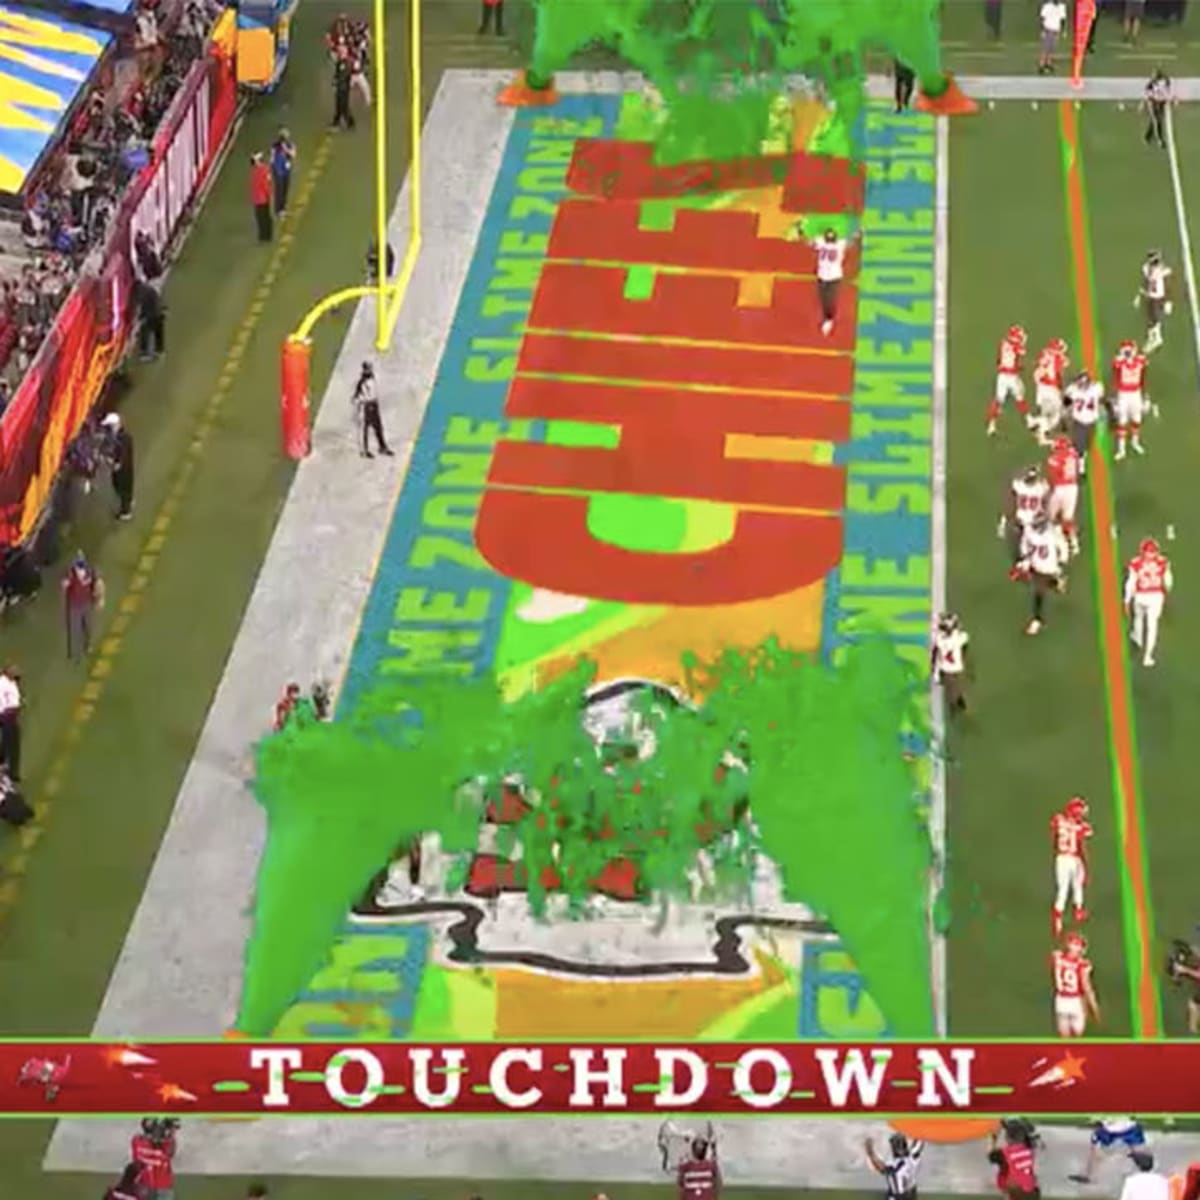 Paramount Press Express  SUPER BOWL LVIII IS GETTING SLIMED ON NICKELODEON!